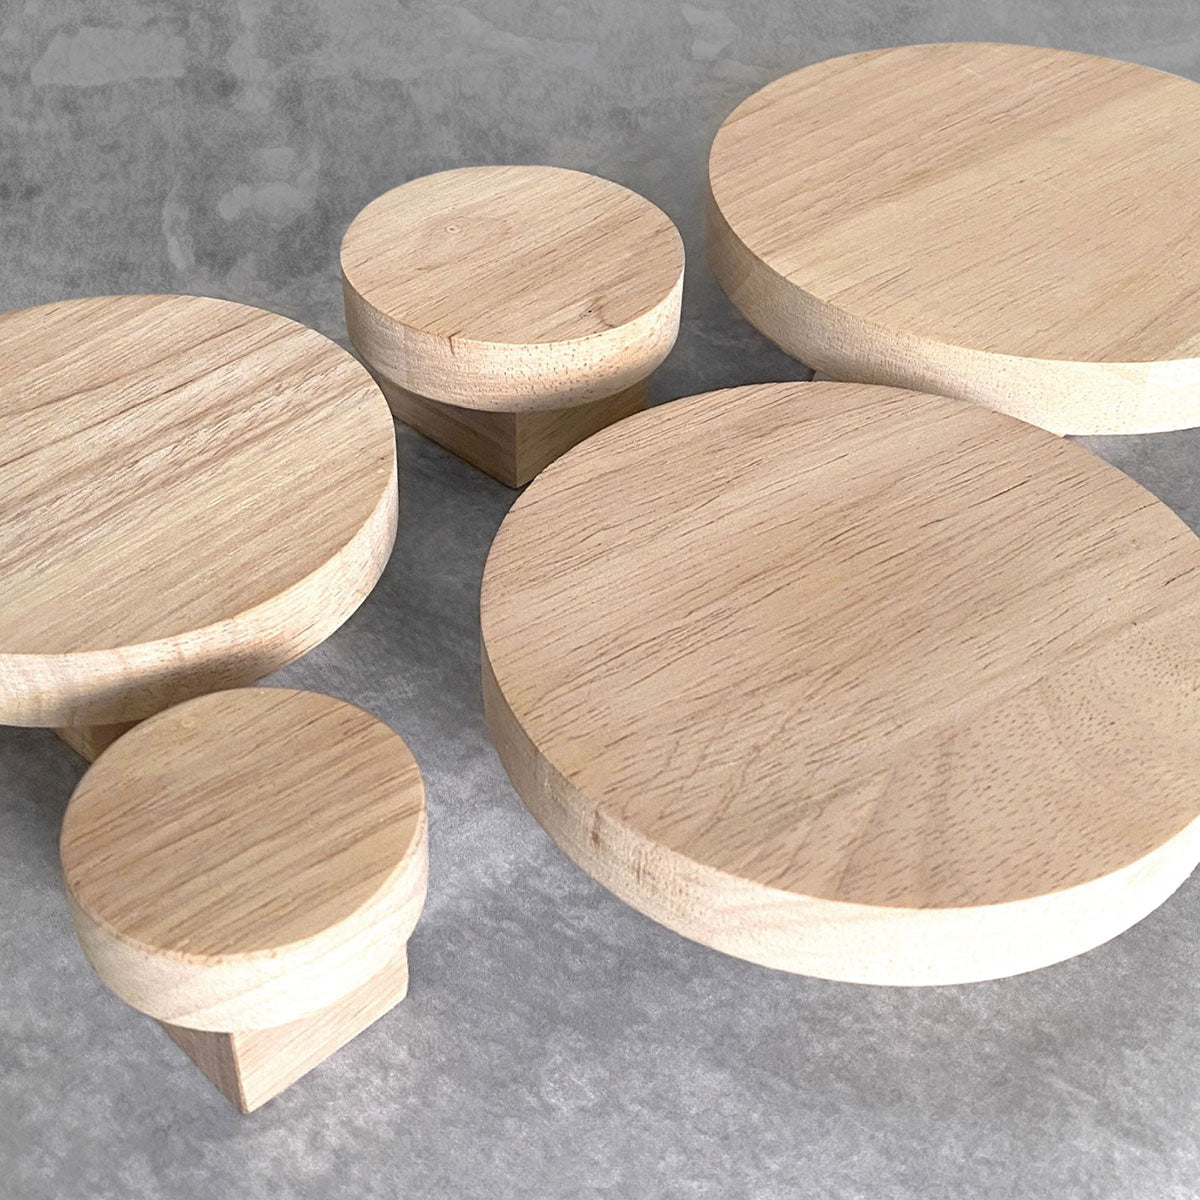 Round oak wall hooks on flat surface showing side view detail. All sizes shown.